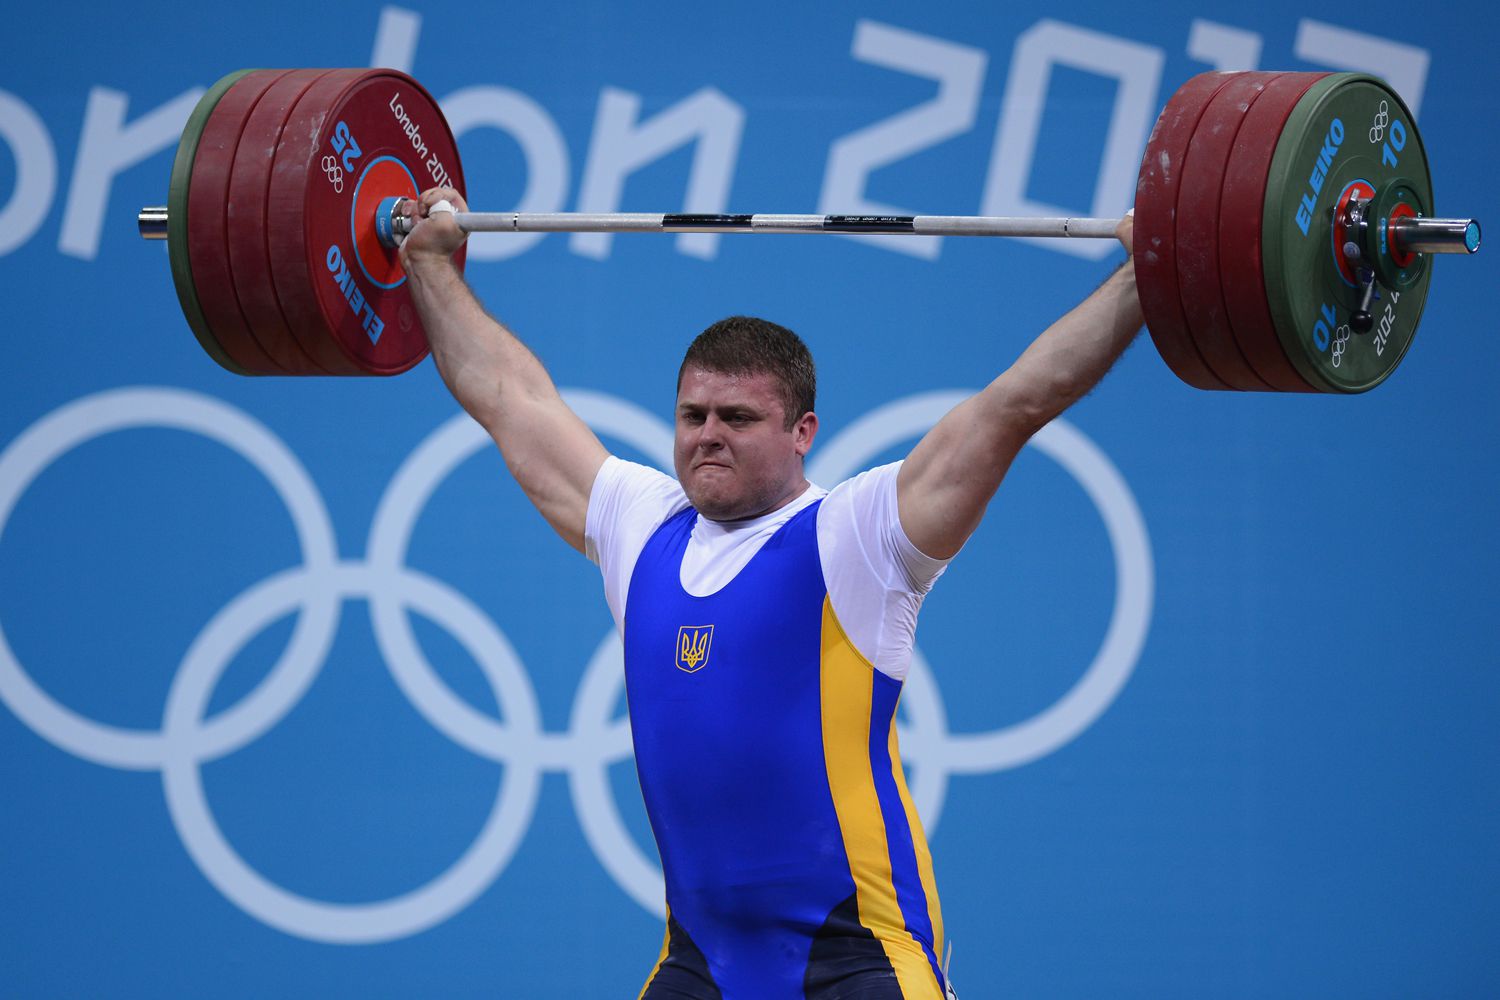 A weightlifter during the 2012 London Olympics.